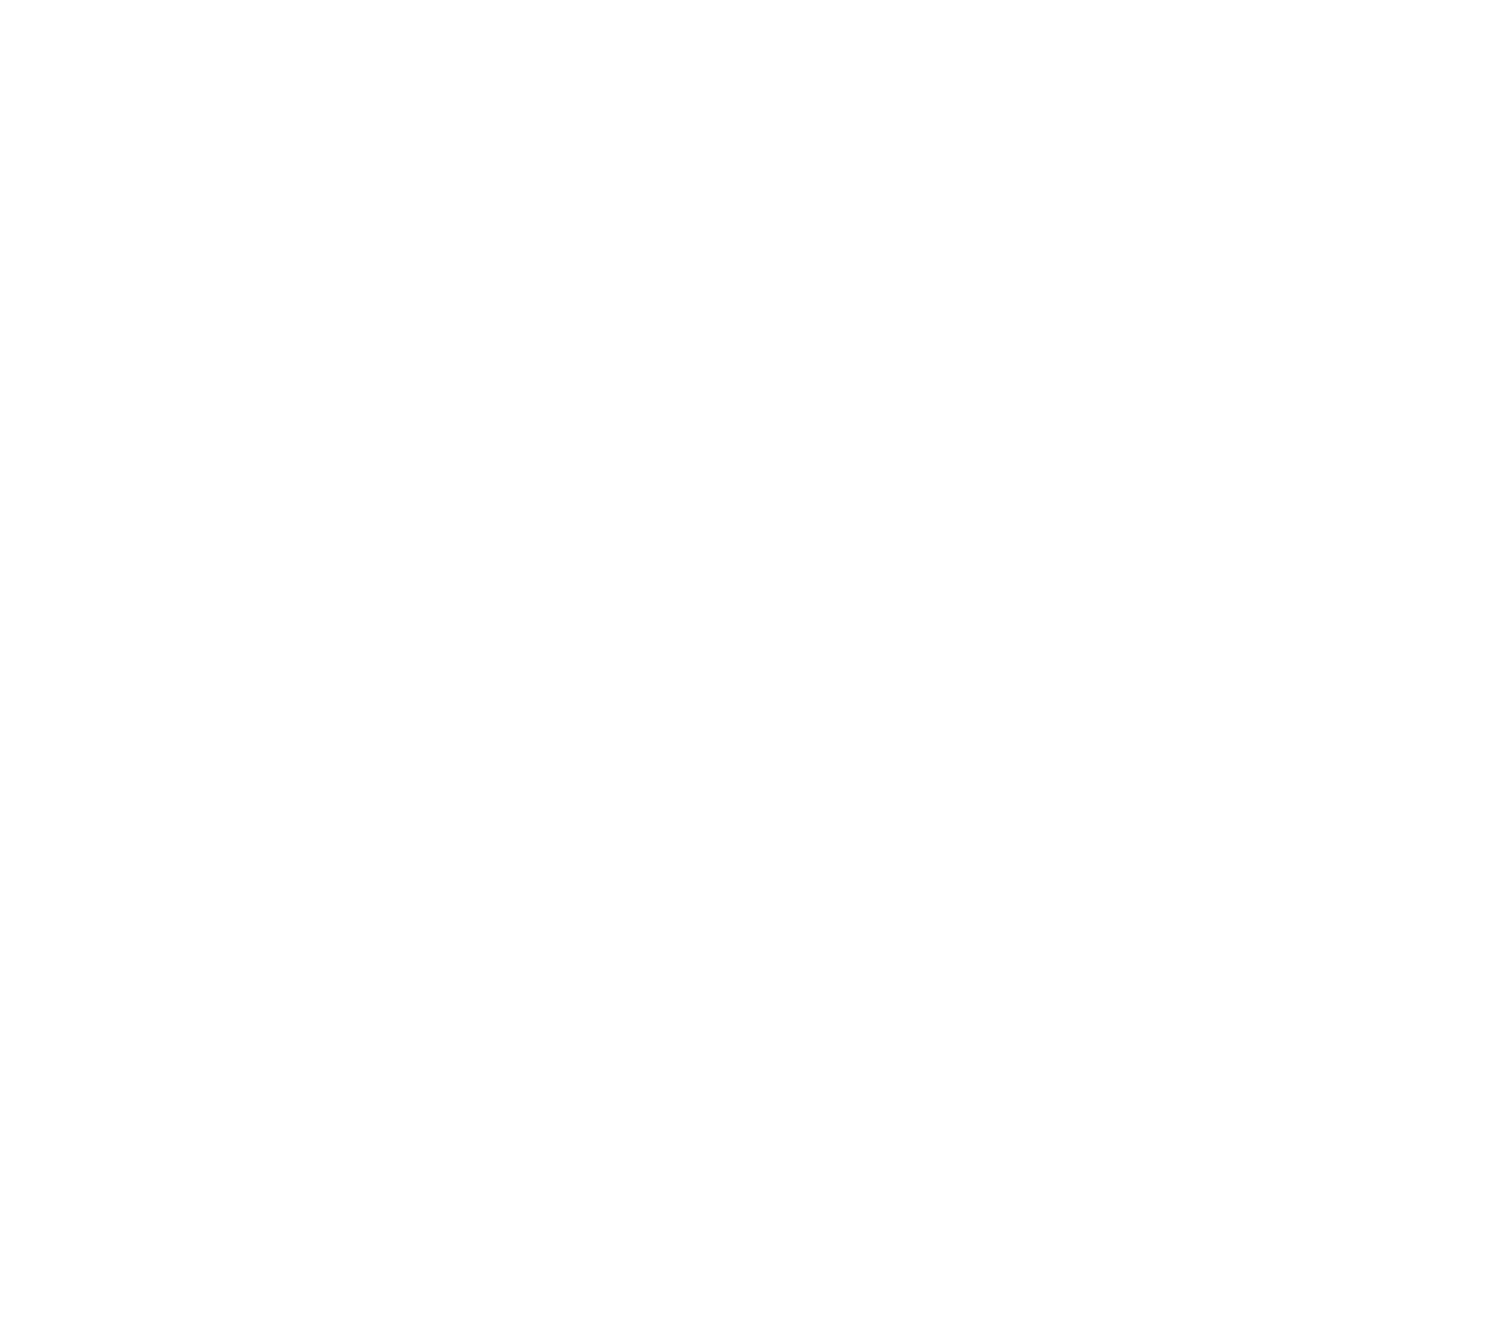 The Giving Notes Project